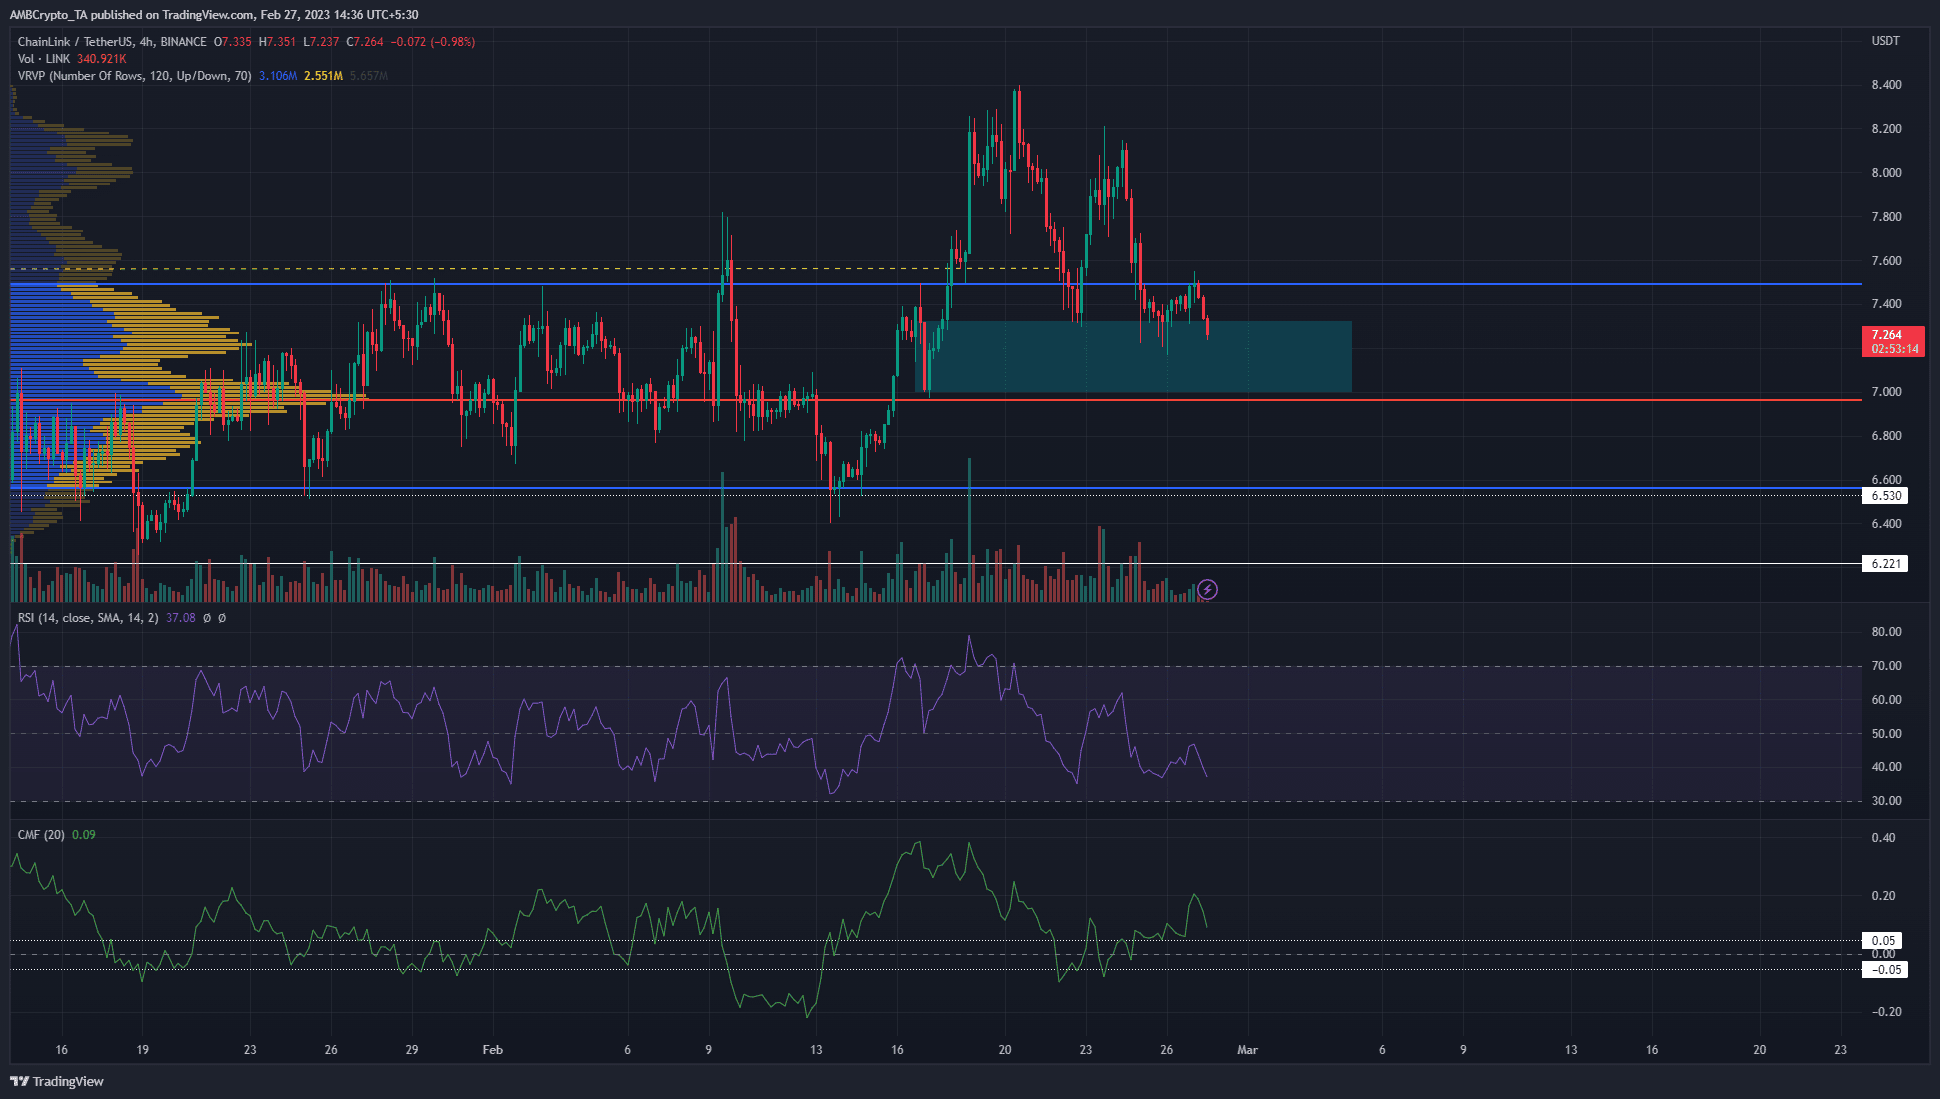 Will the $7 support level come to the rescue of Chainlink bulls once again?